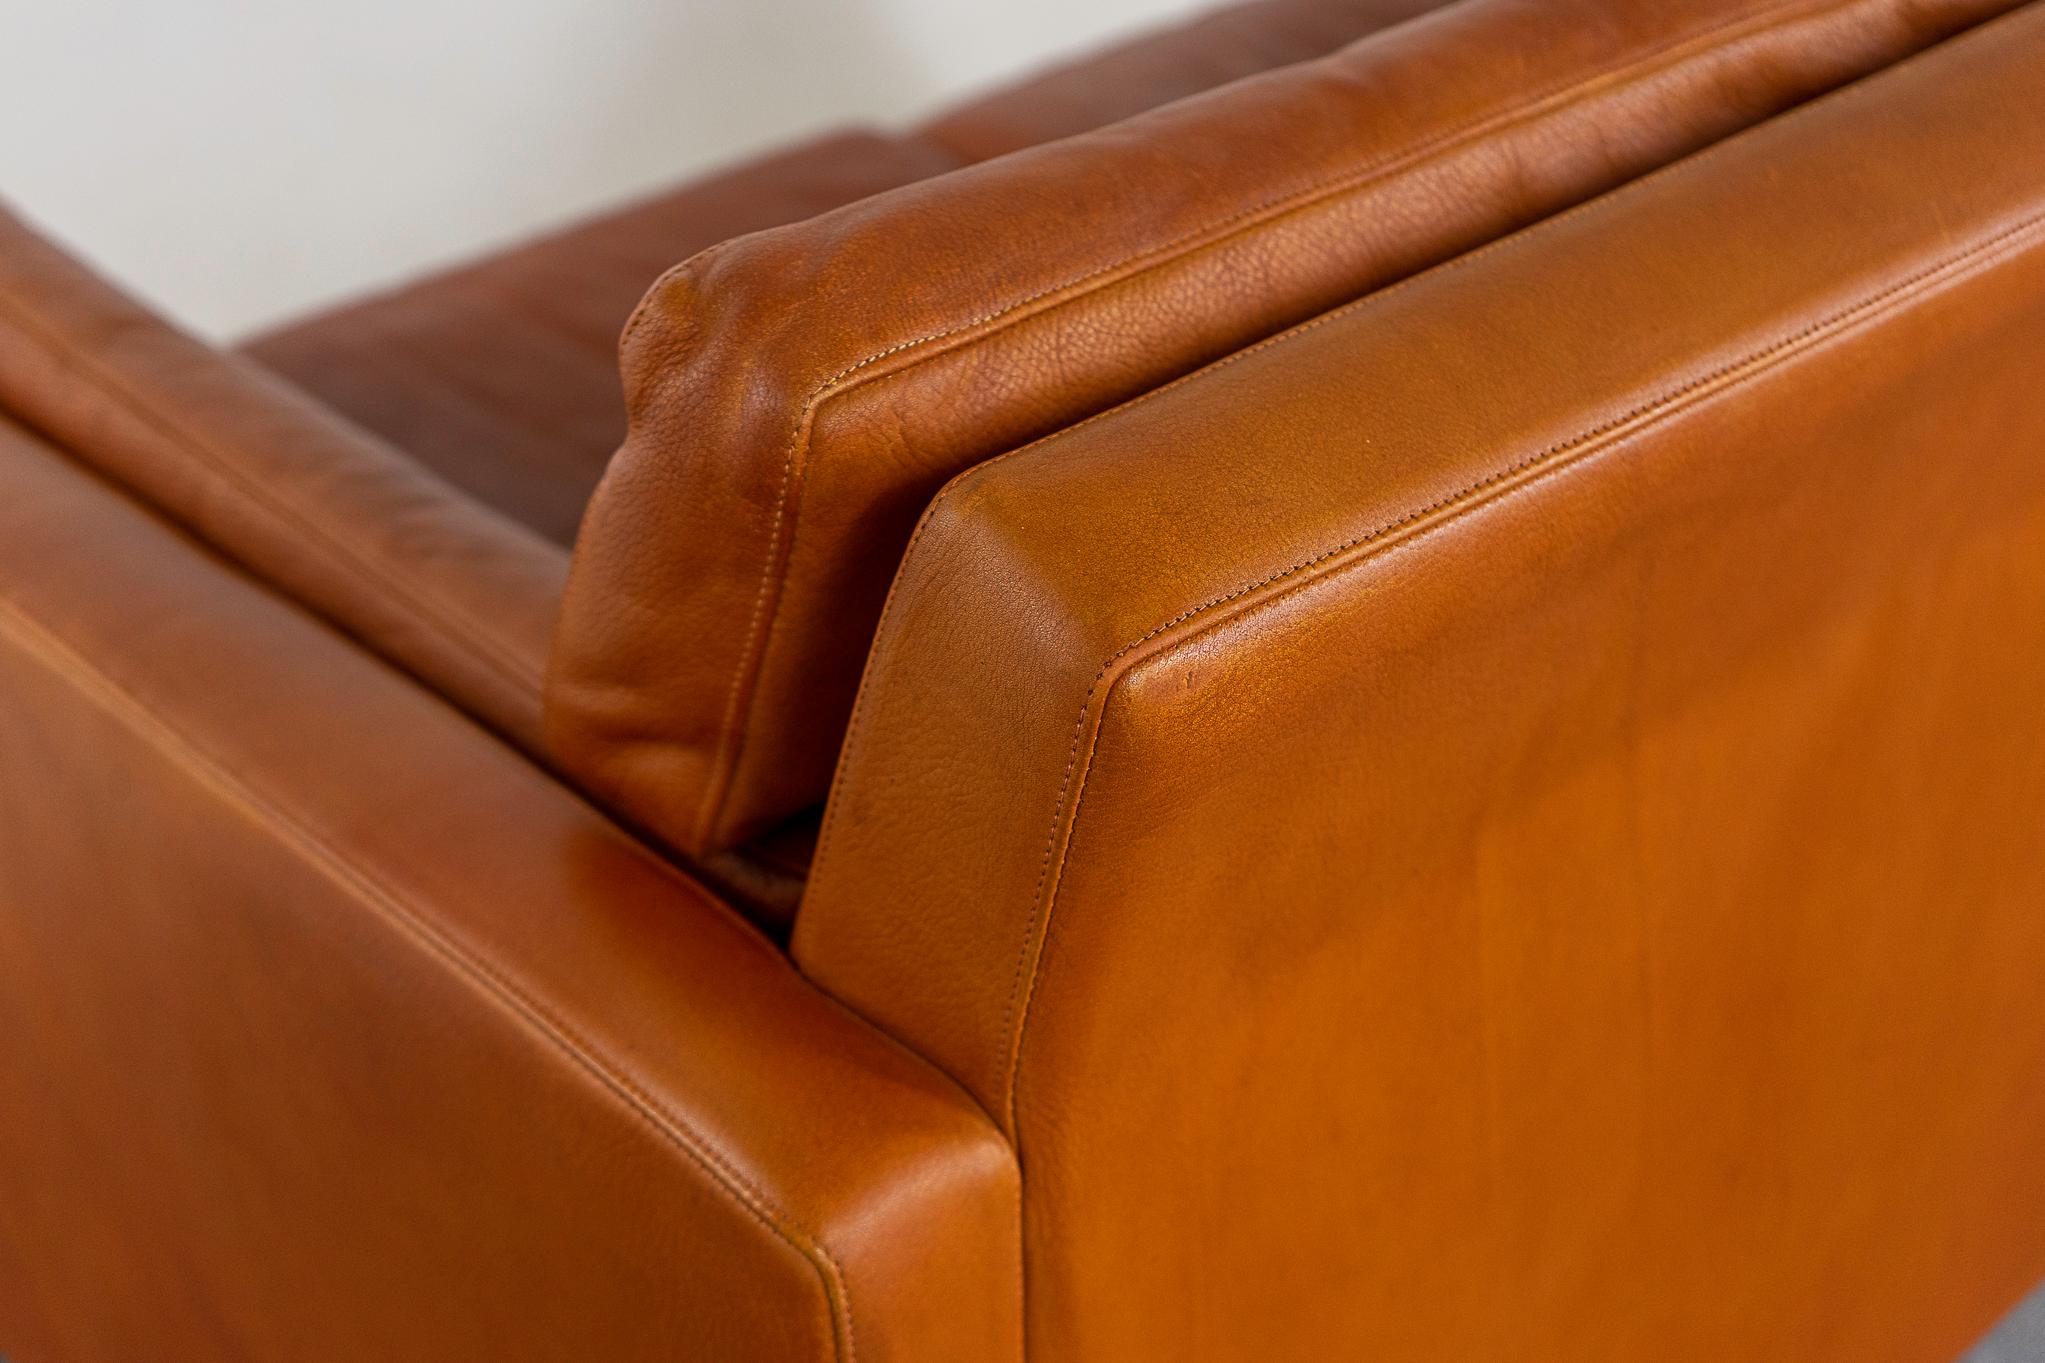 Leather loveseat circa 1960's. Original tan leather is soft and supple while also being durable to ensure years of use and enjoyment. Compact footprint for urban dwellers in cozy lofts or condos!

Please inquire for remote and international shipping